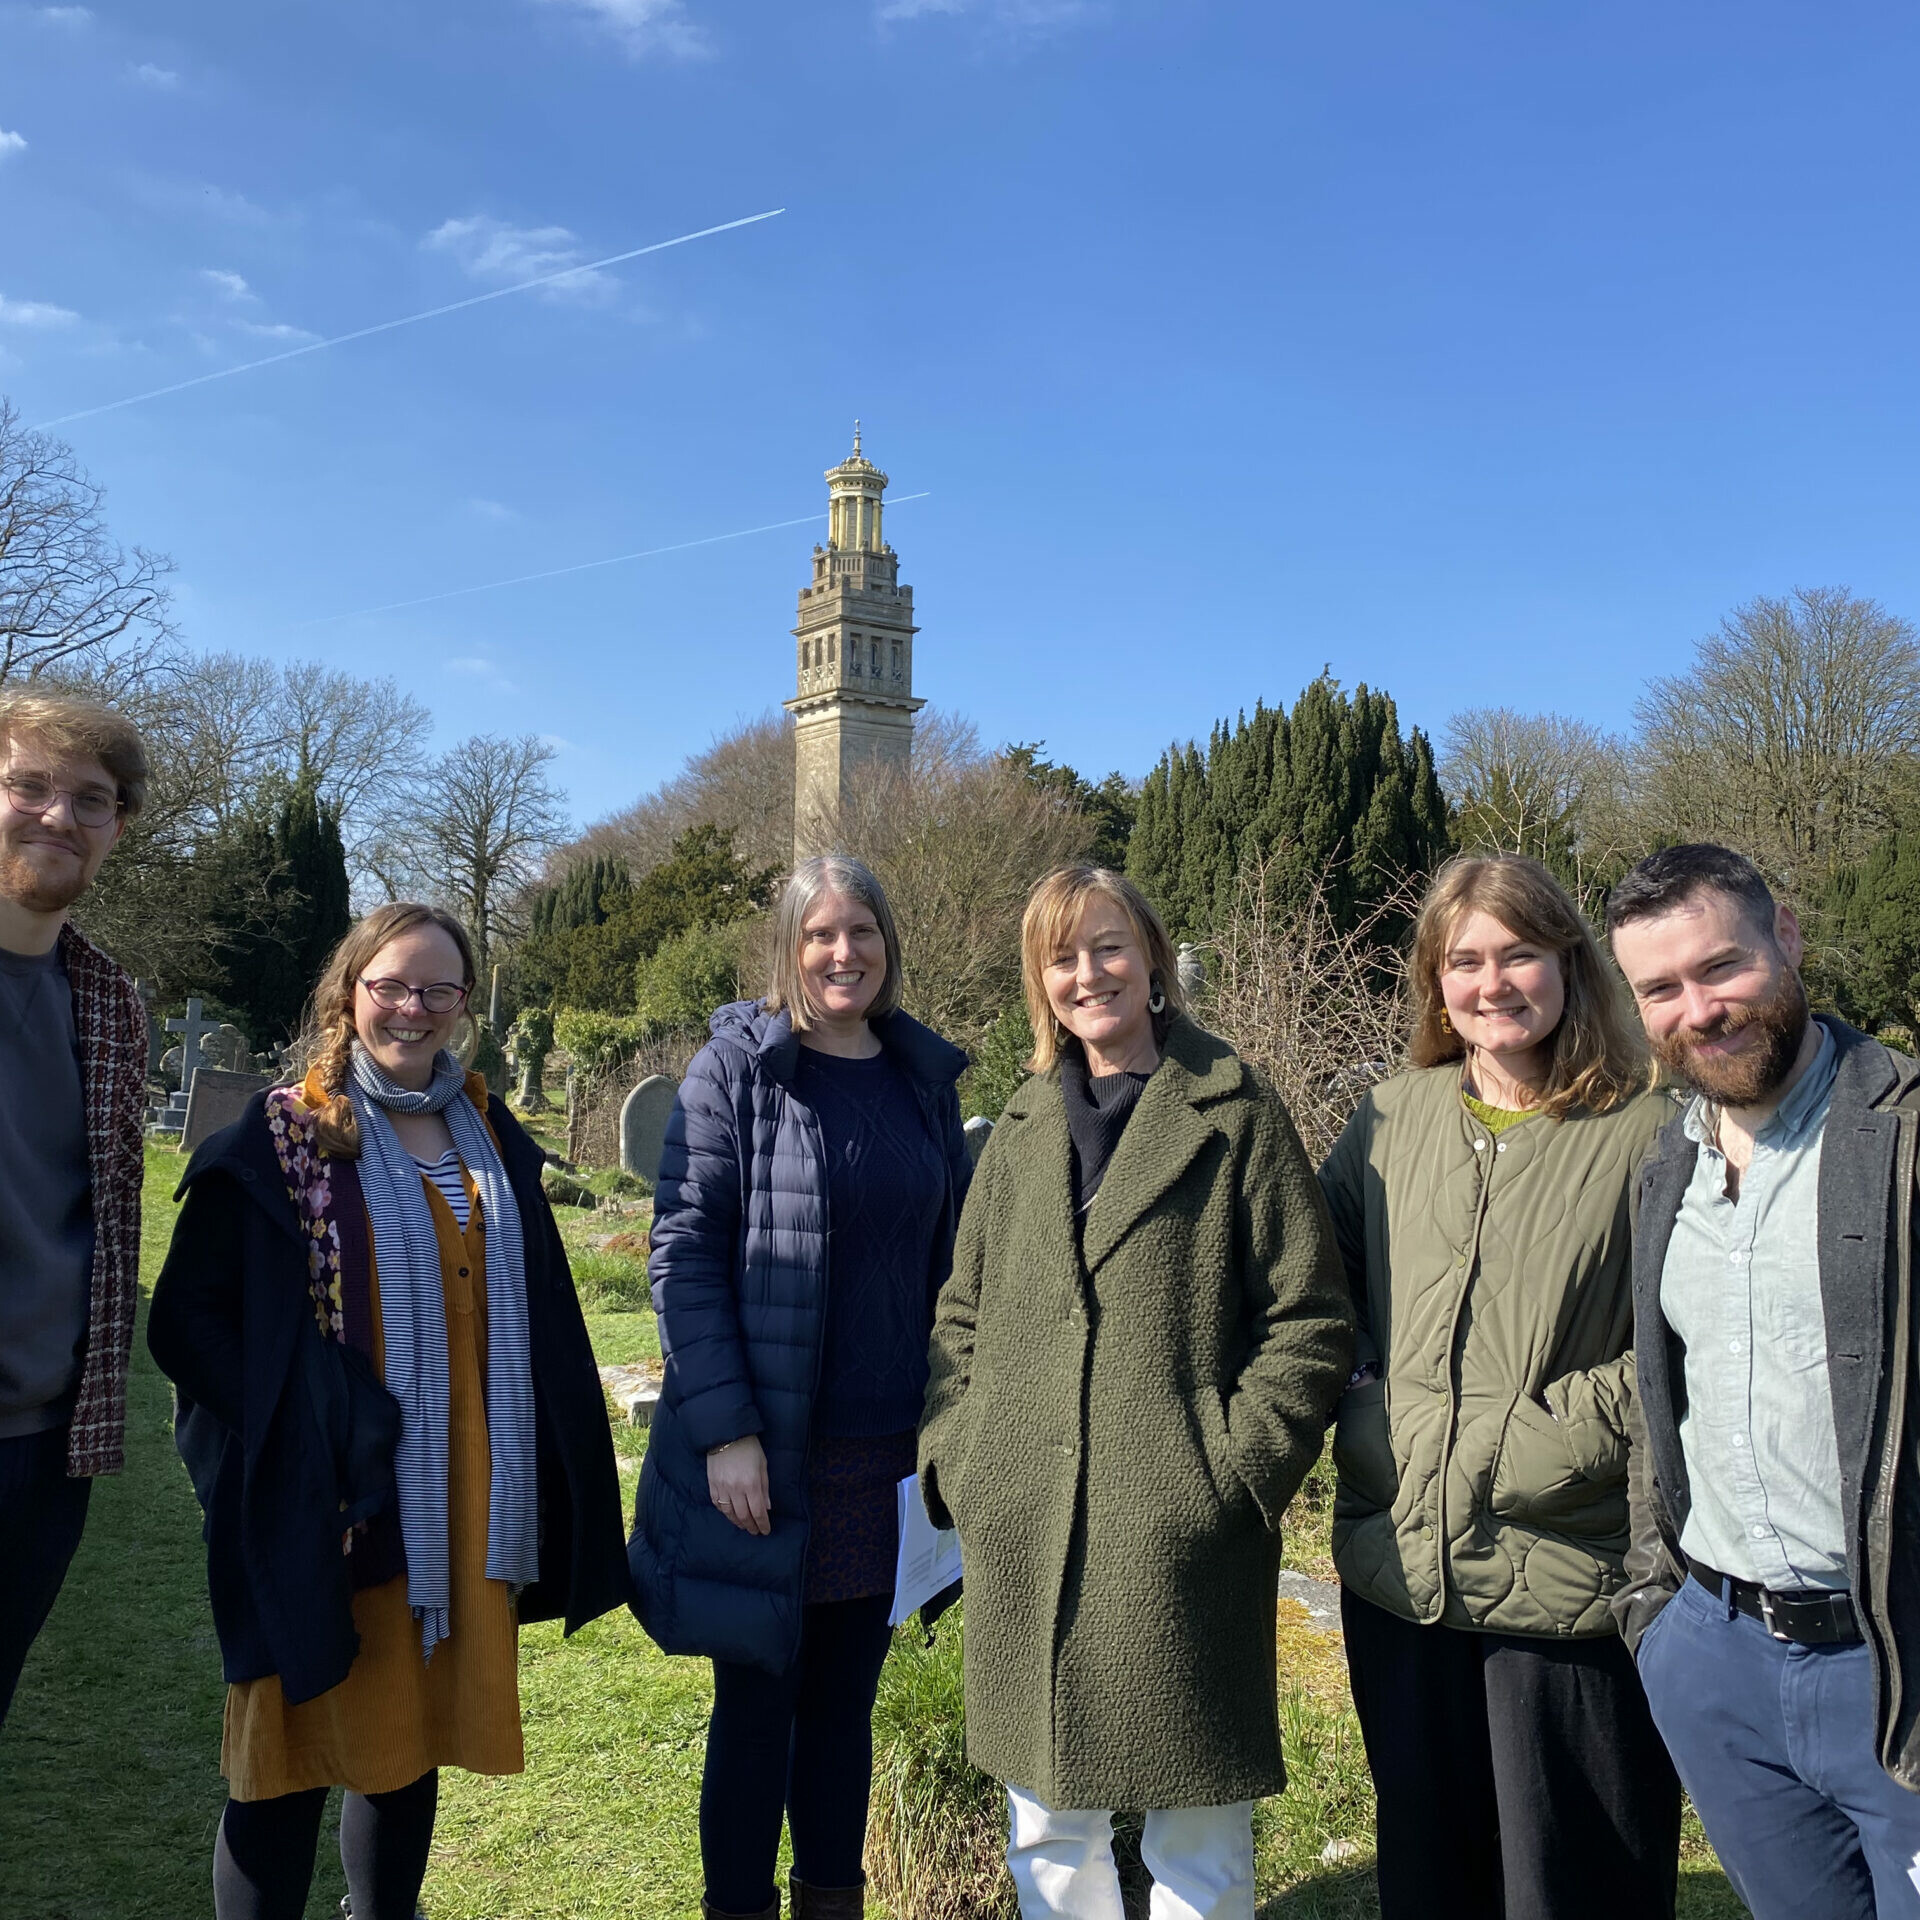 Zubr Curio and team at Beckford's Tower